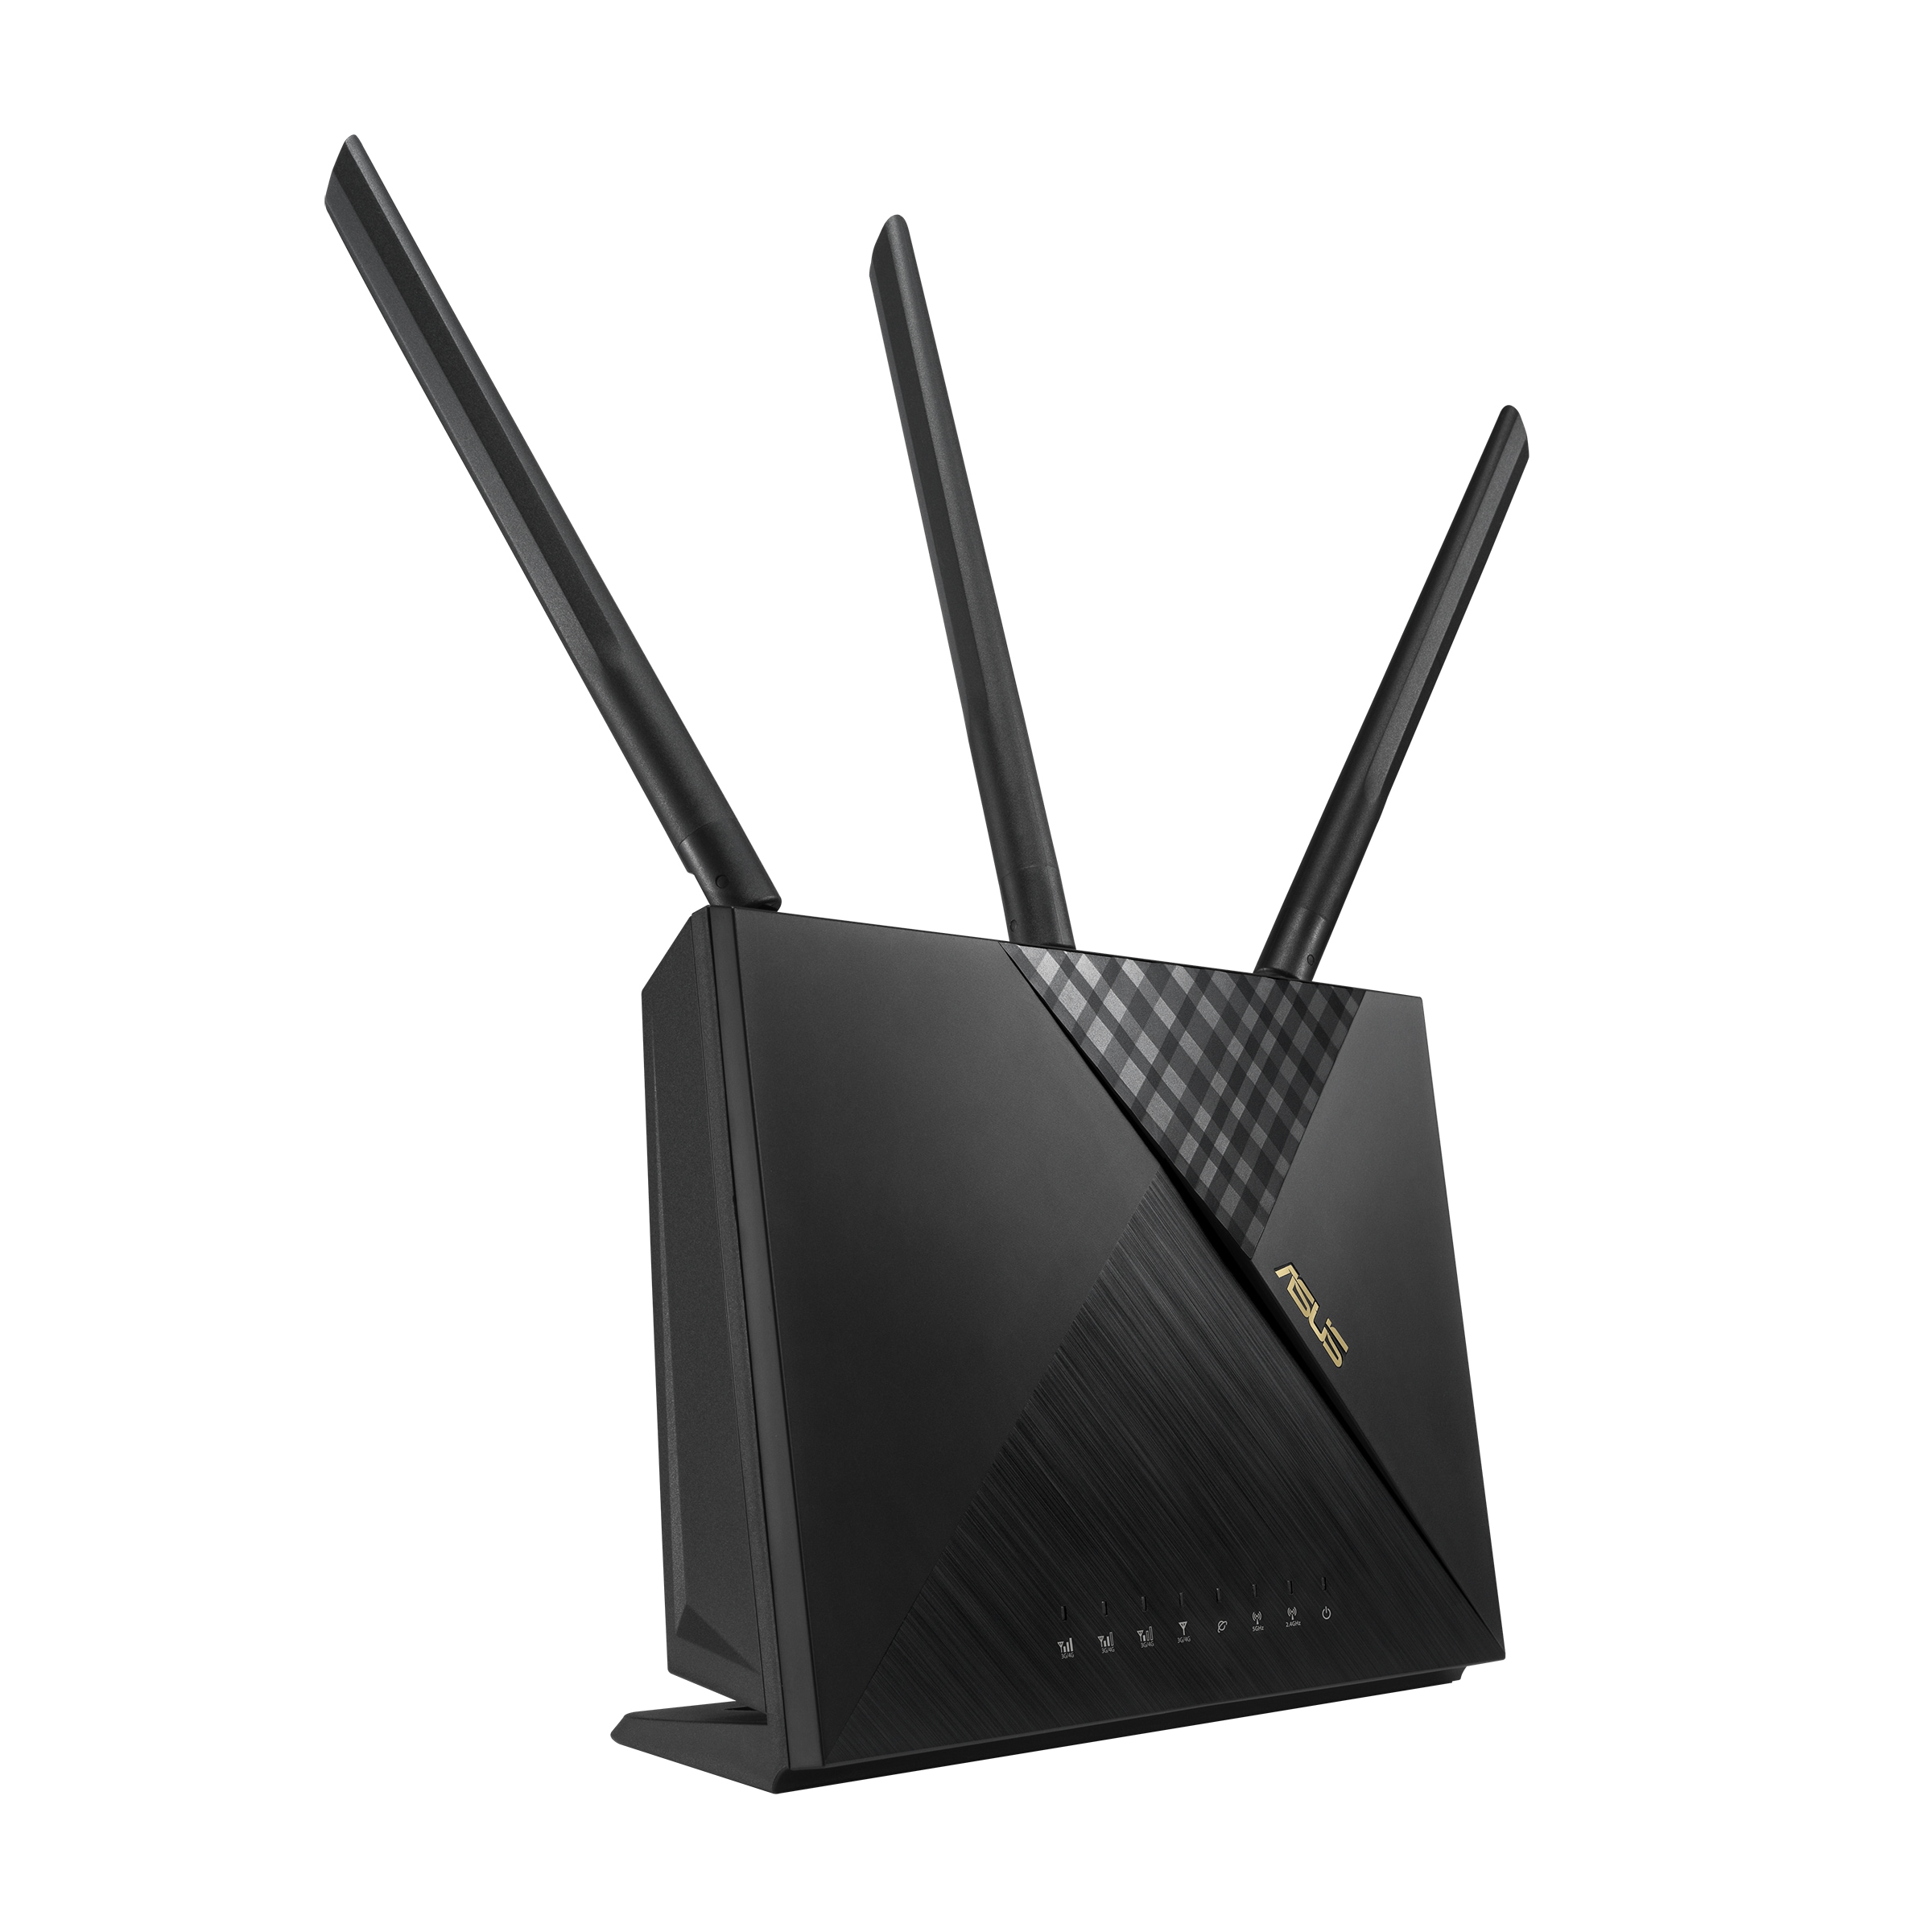 WLAN-Router »Router Asus WiFi 6 4G-AX56 AX1800«